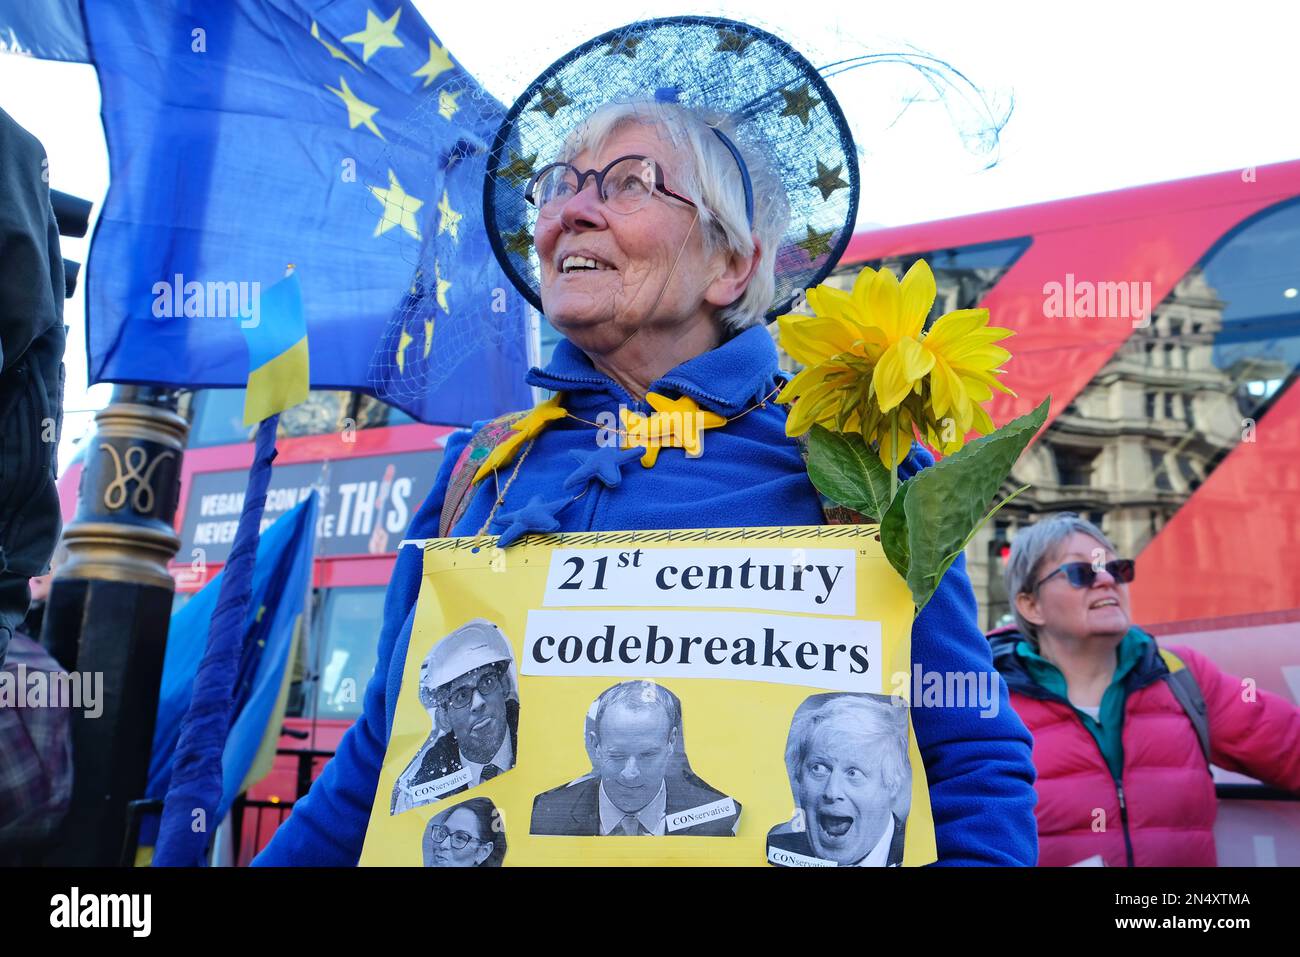 London,UK. A pro-EU protester holds an anti-Tory placard mocking several members of the Cabinet, as the party is rocked by multiple scandals. Stock Photo